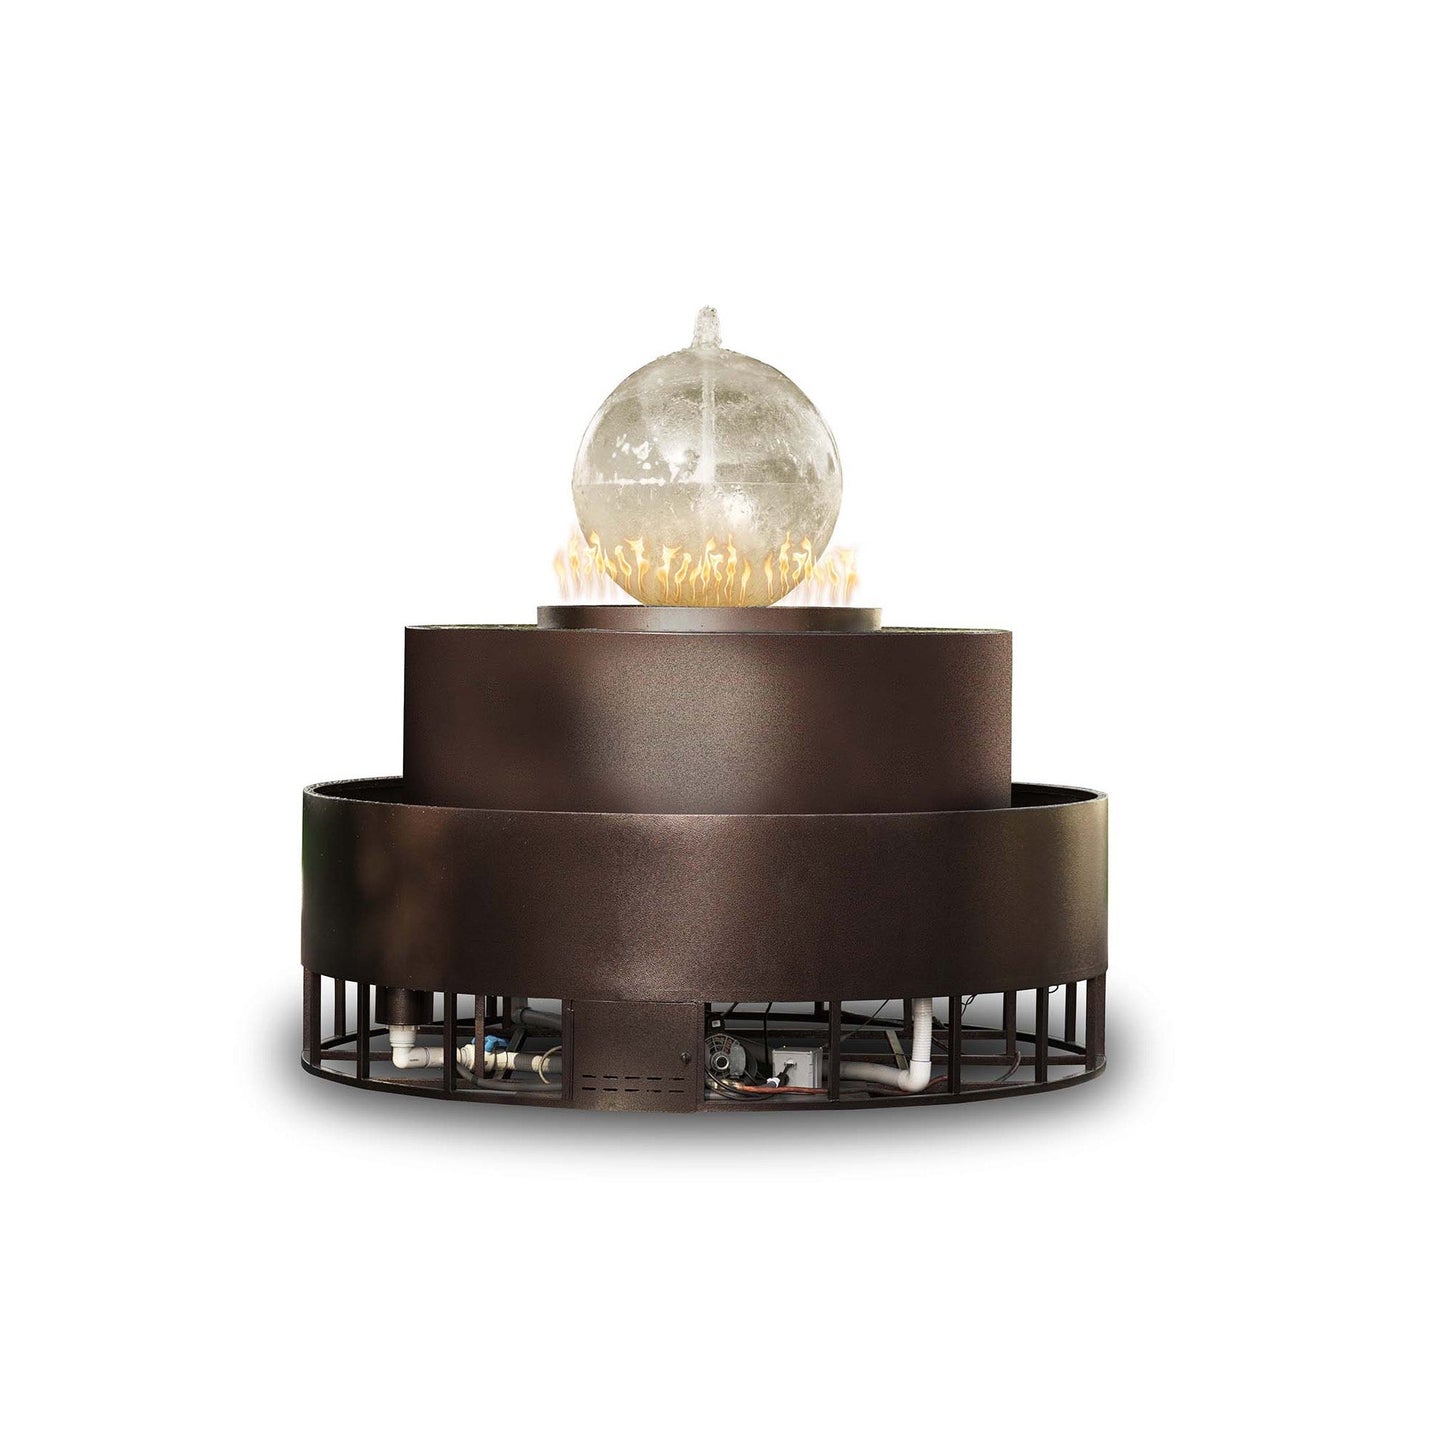 The Outdoor Plus Round Atlas 89" White Powder Coated Liquid Propane Fire & Water Fountain with 12V Electronic Ignition